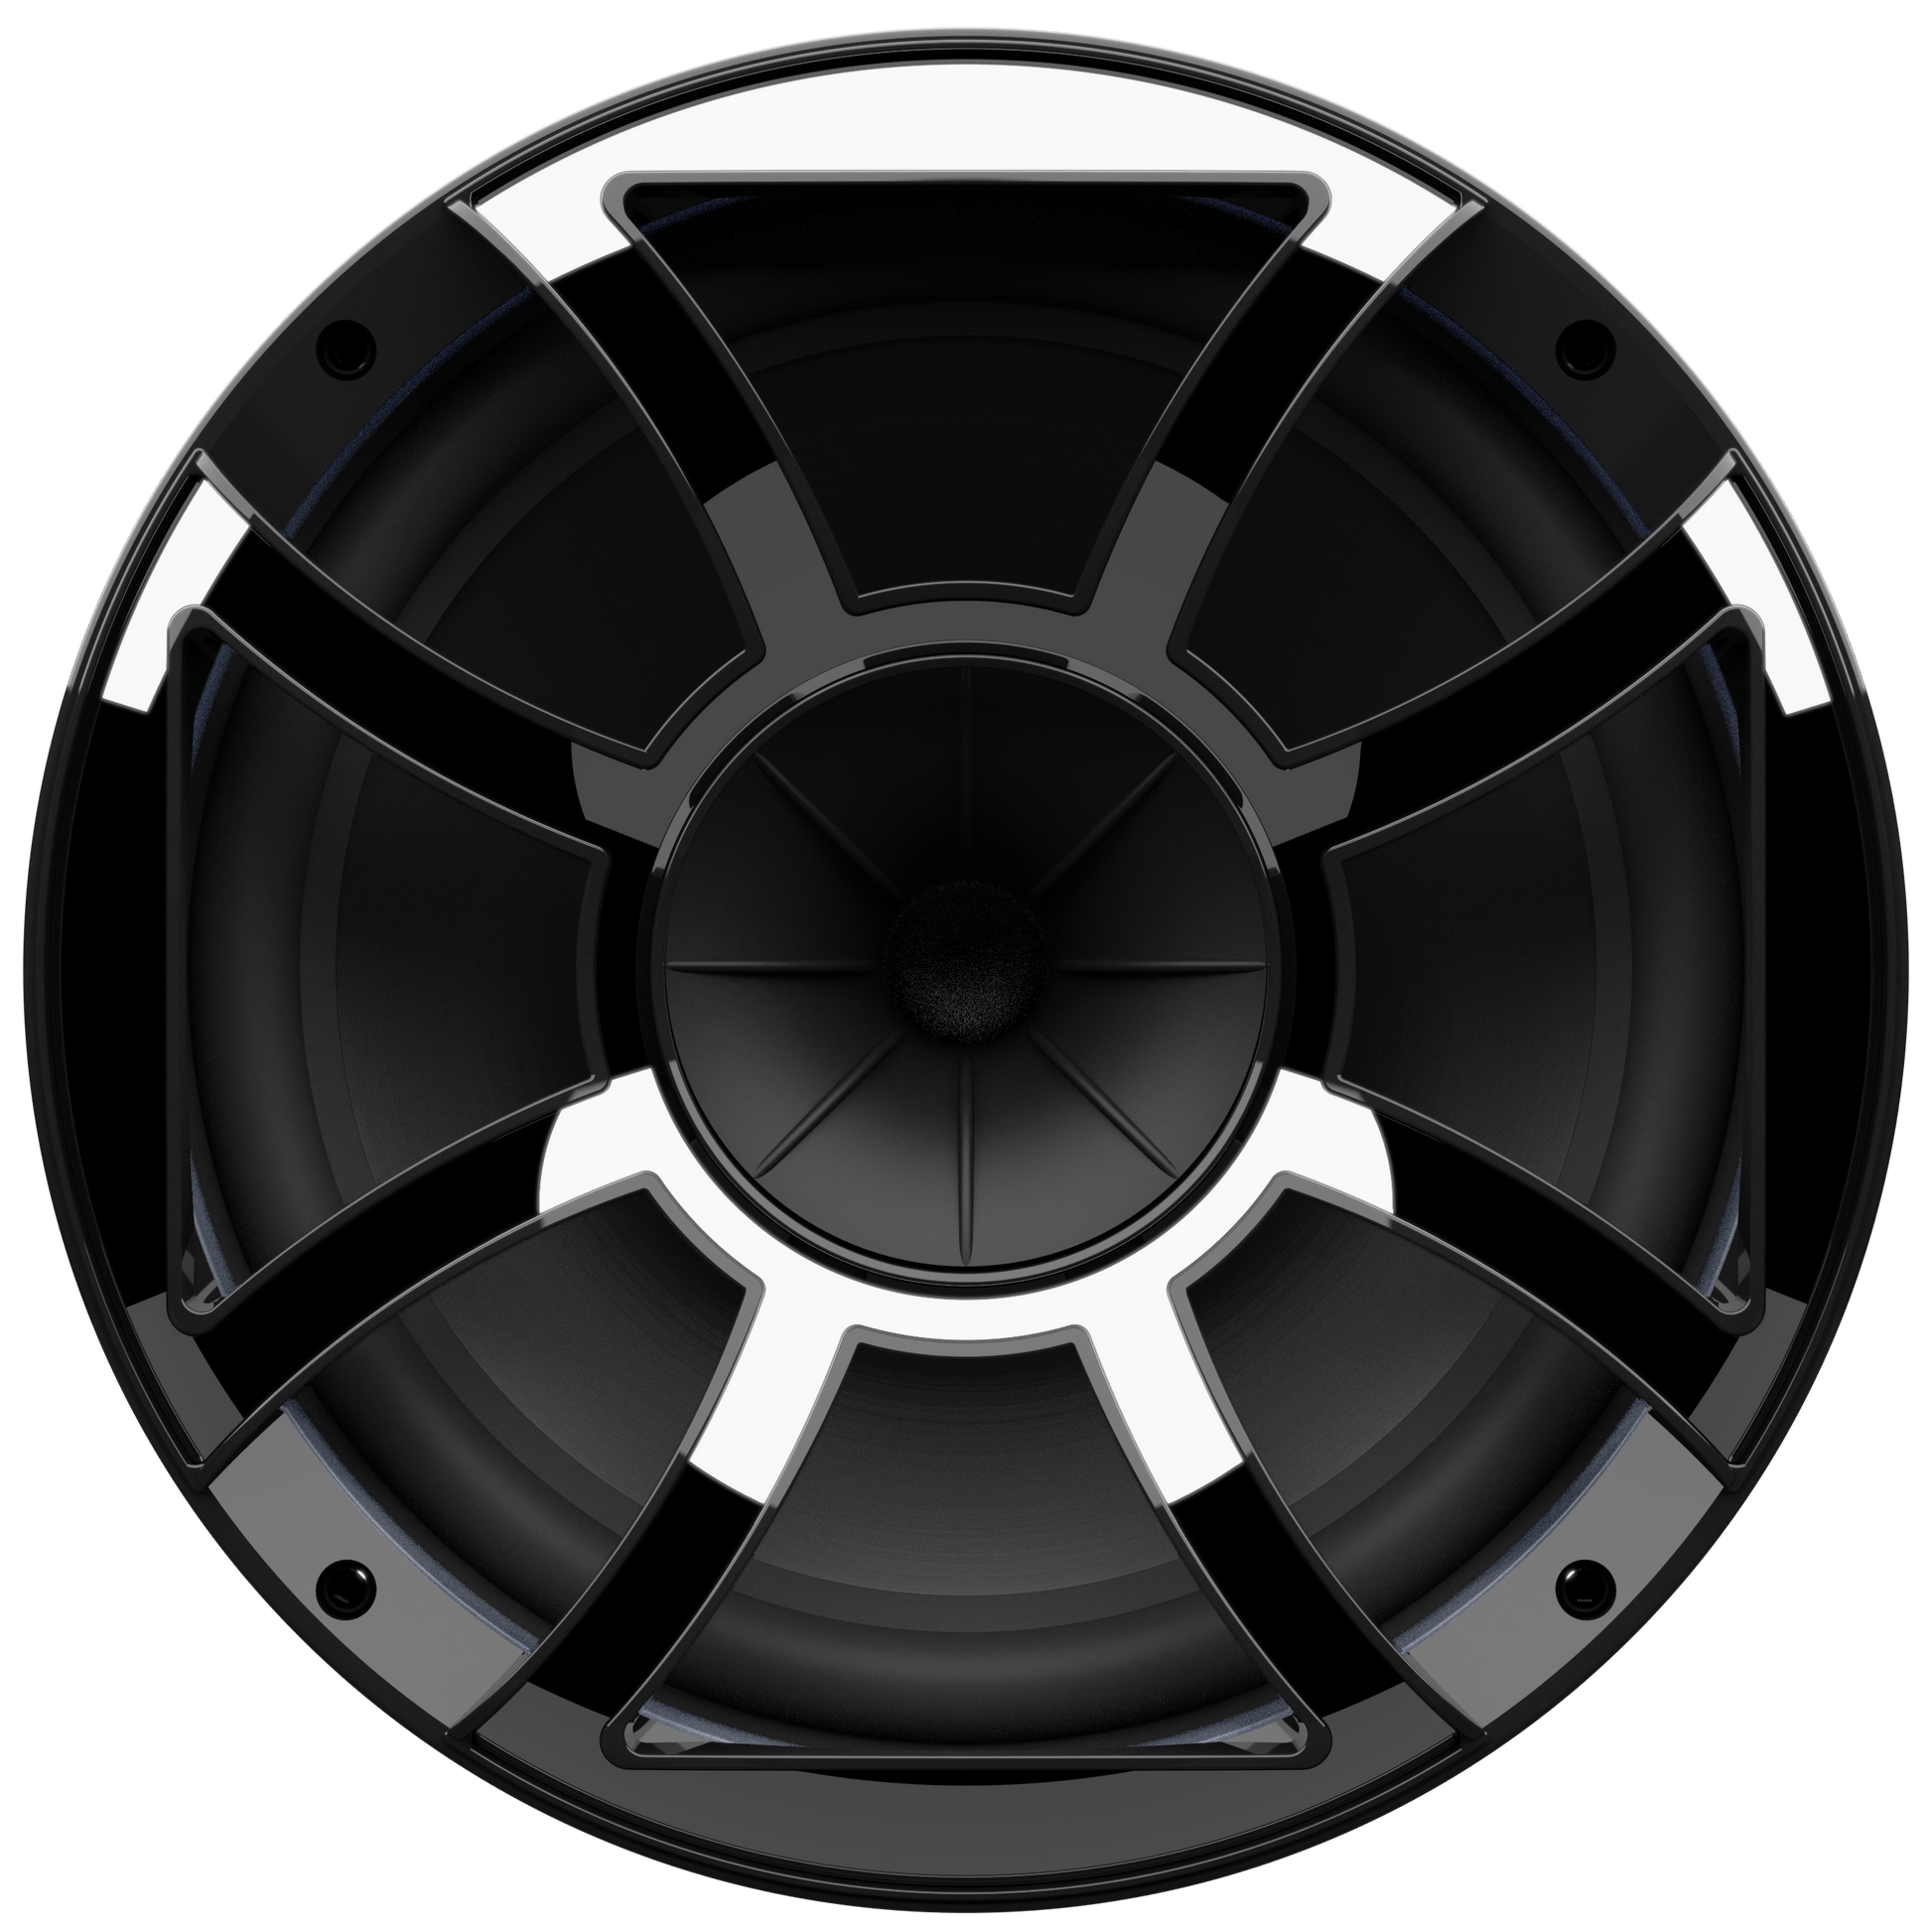 Wet Sounds Boat Wake Tower Speakers Wet Sounds Rev12 HD | High-Output 12" Wakeboard Tower Speakers